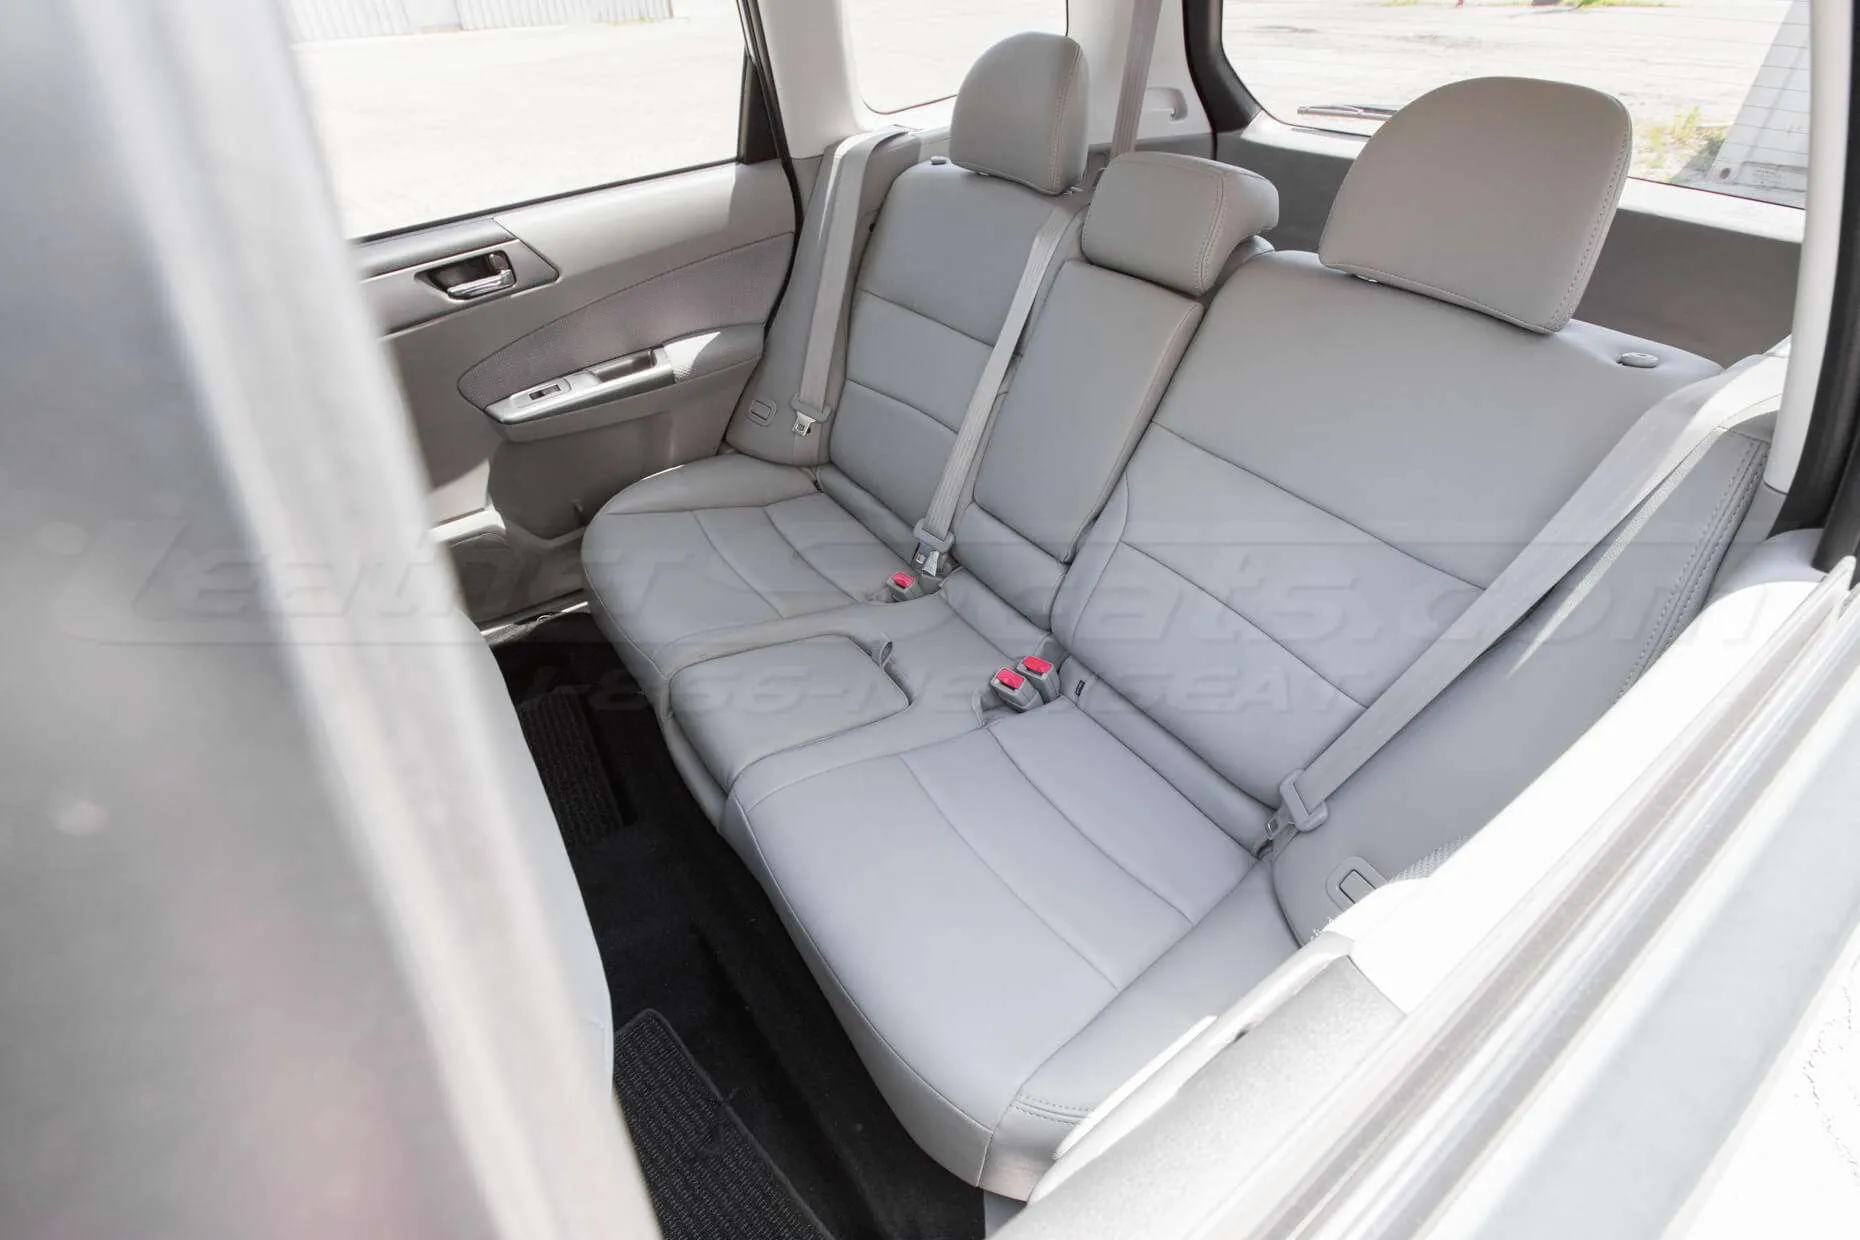 2011-2013 Subaru Forester Leather Seats - Ash - Installed Rear seats